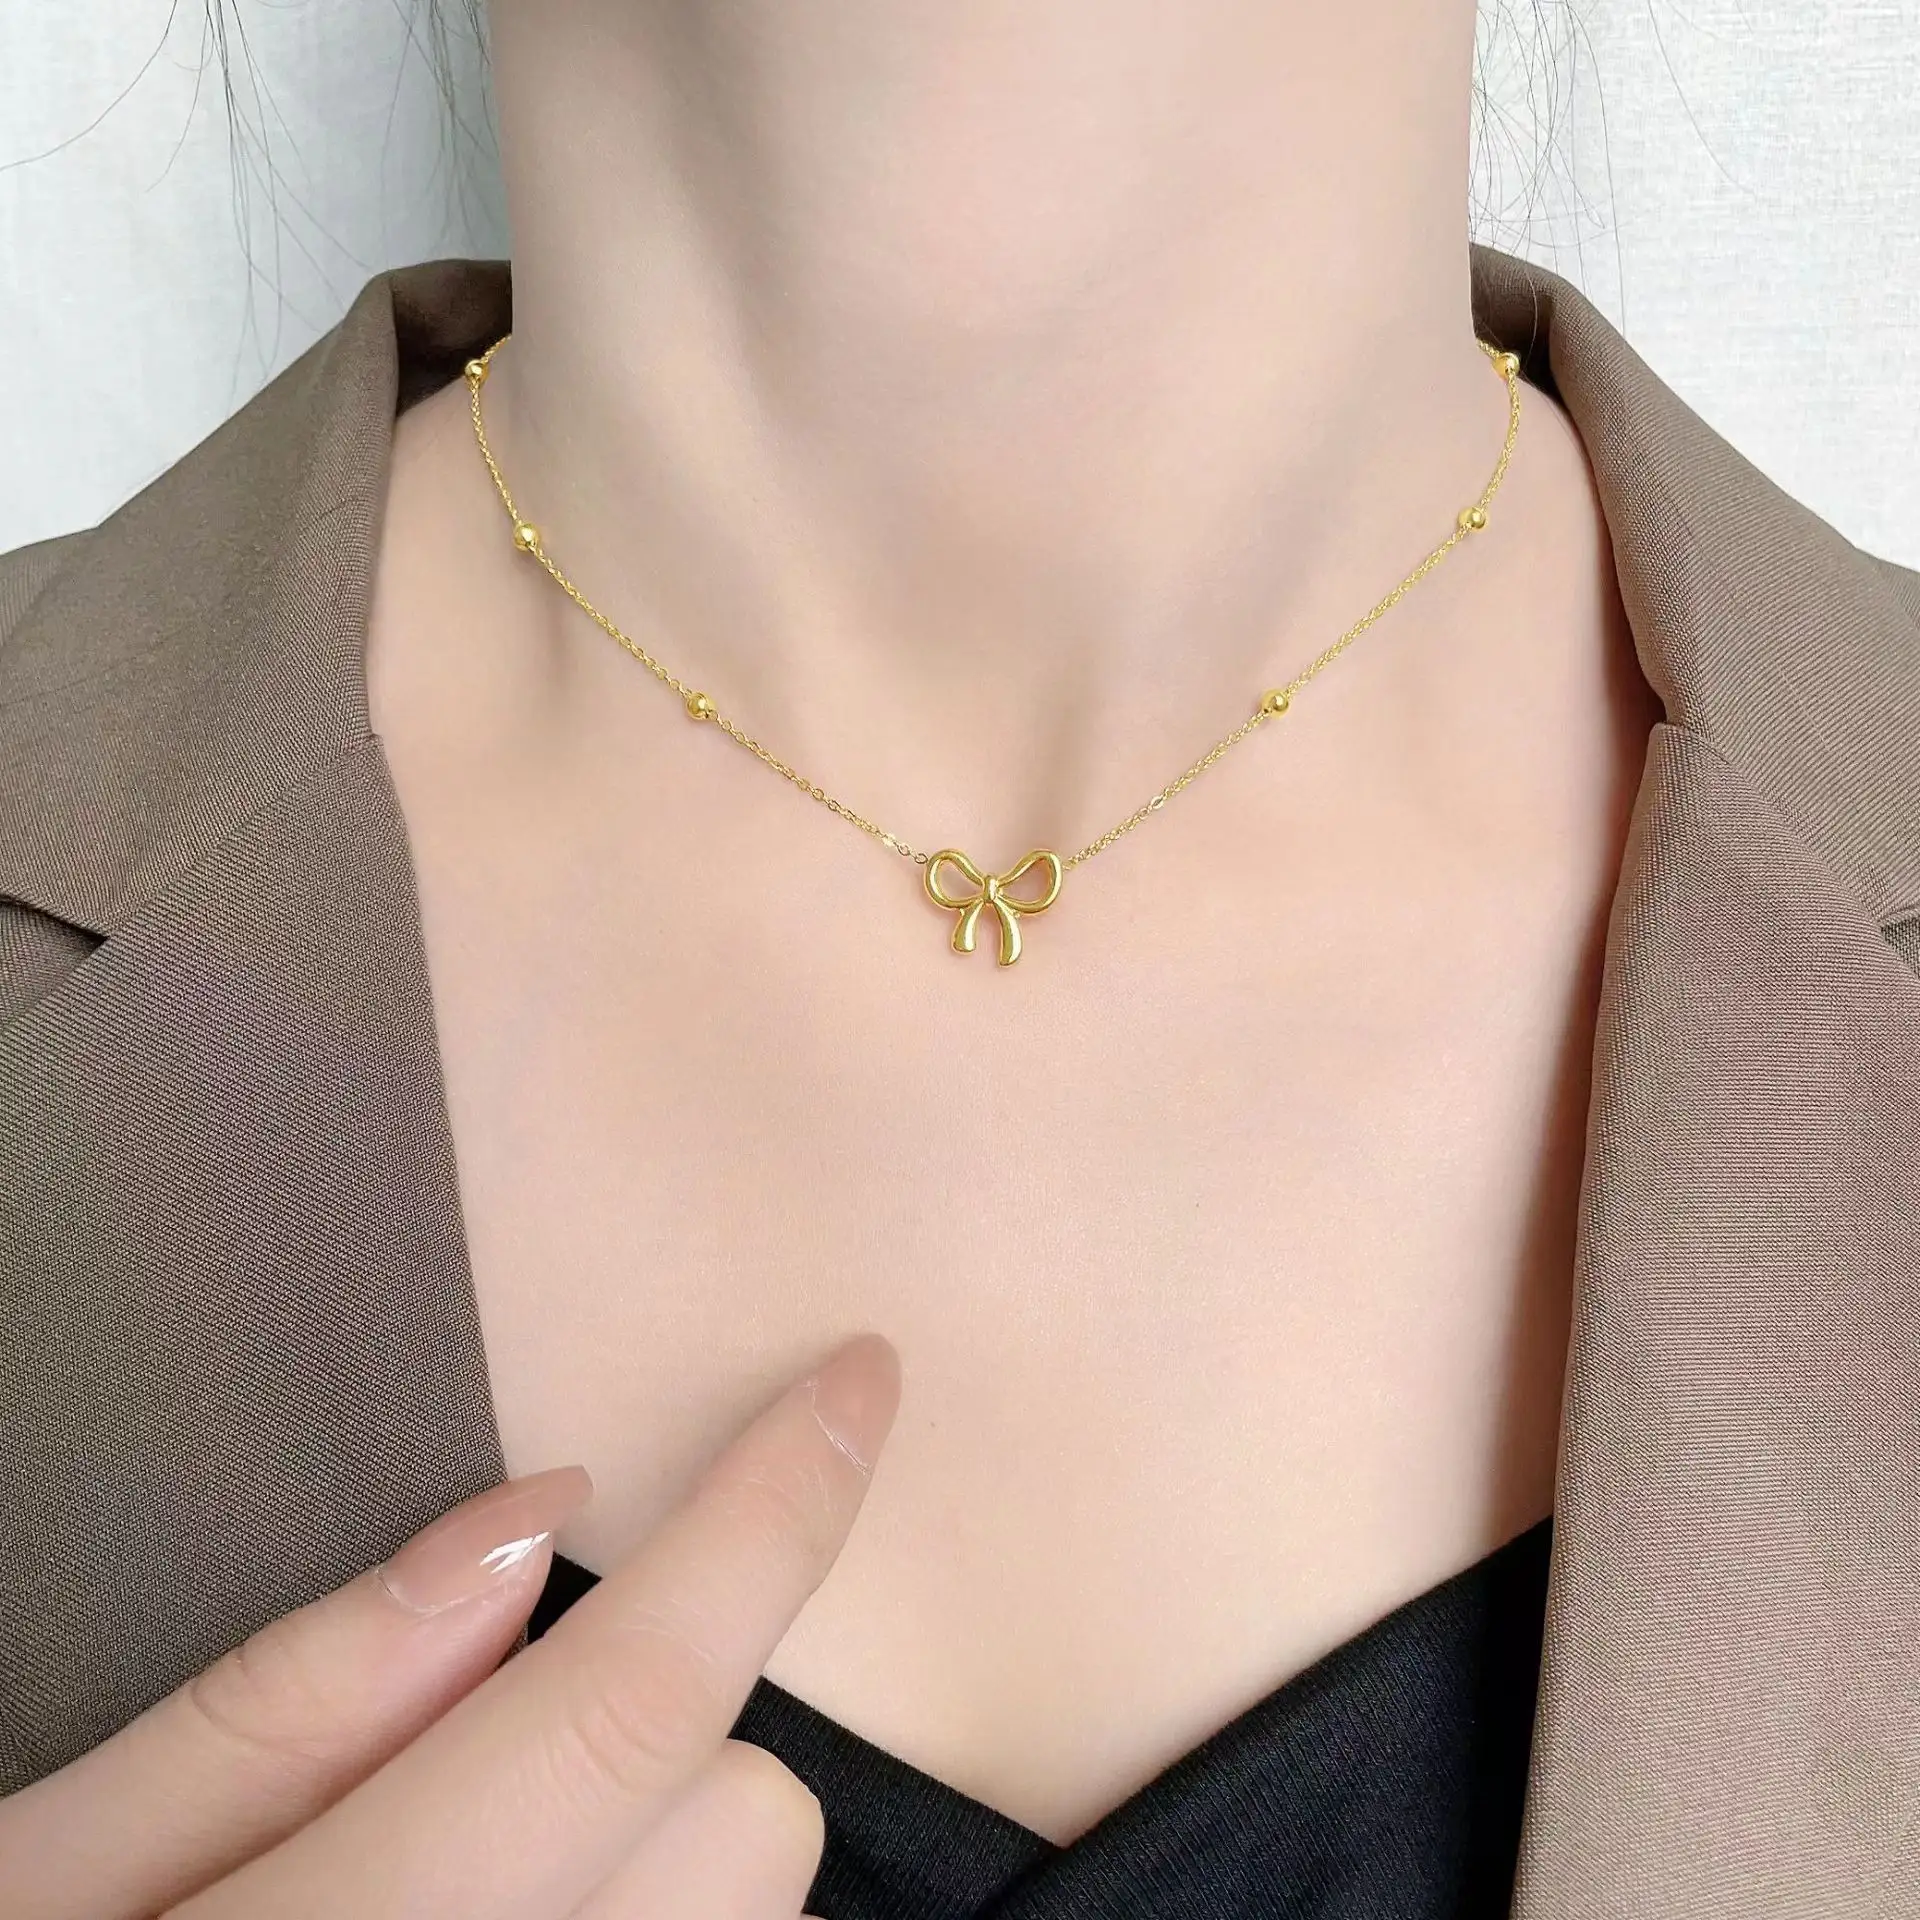 Fashion Bowknot Choker Necklace Stainless Steel Bead Chain 18K Gold Plated Ribbon Bow Pendant Necklace For Women Girls Gift